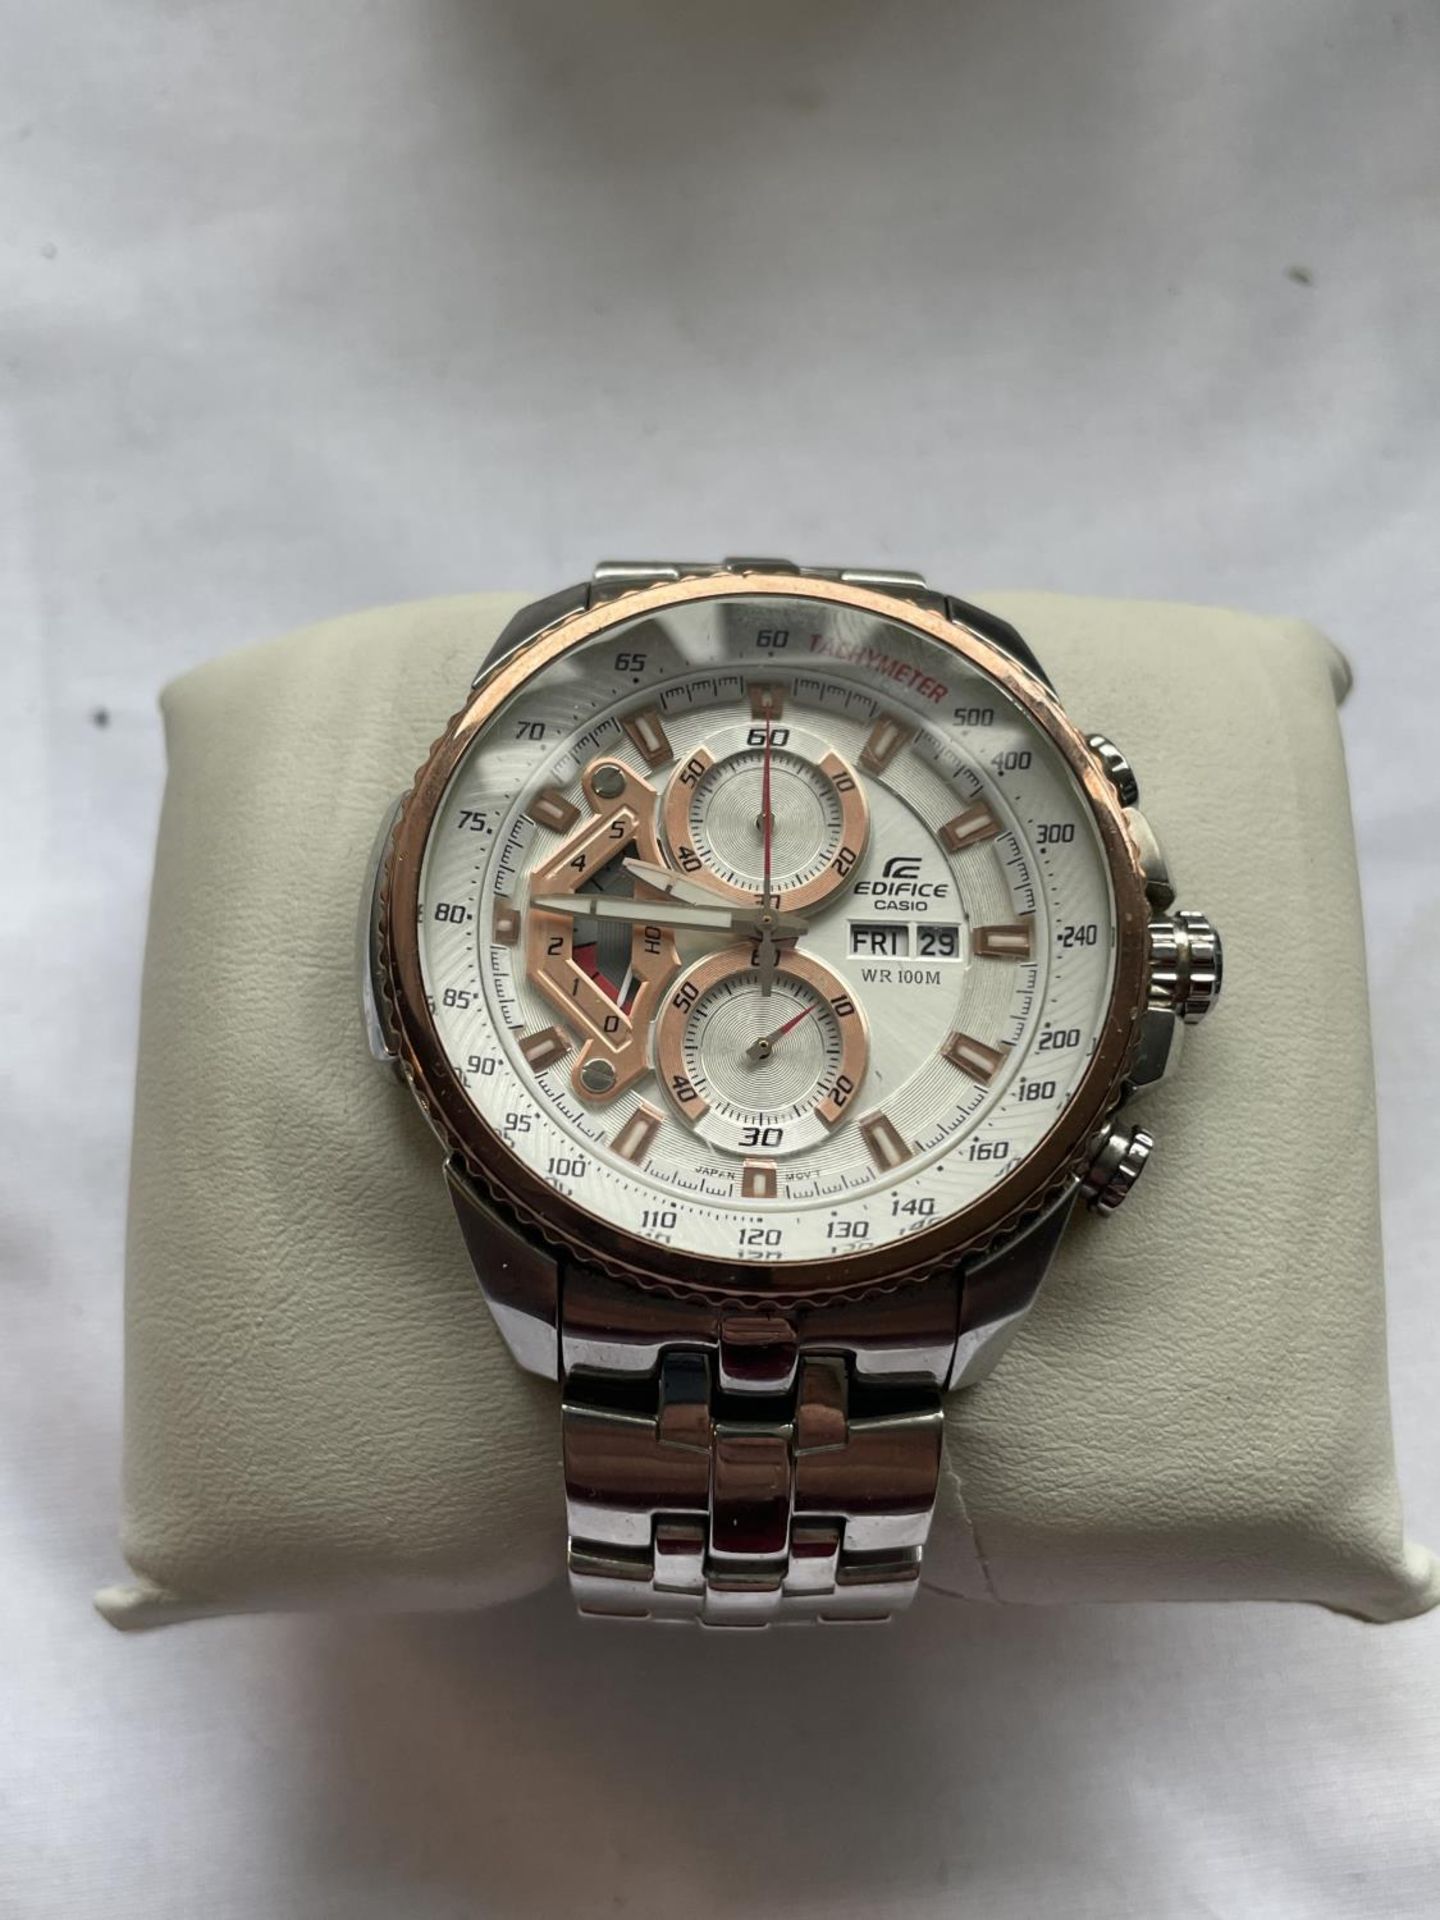 AN AS NEW AND BOXED CASIO EDIFICE WRIST WATCH SEEN WORKING BUT NO WARRANTY - Image 2 of 4